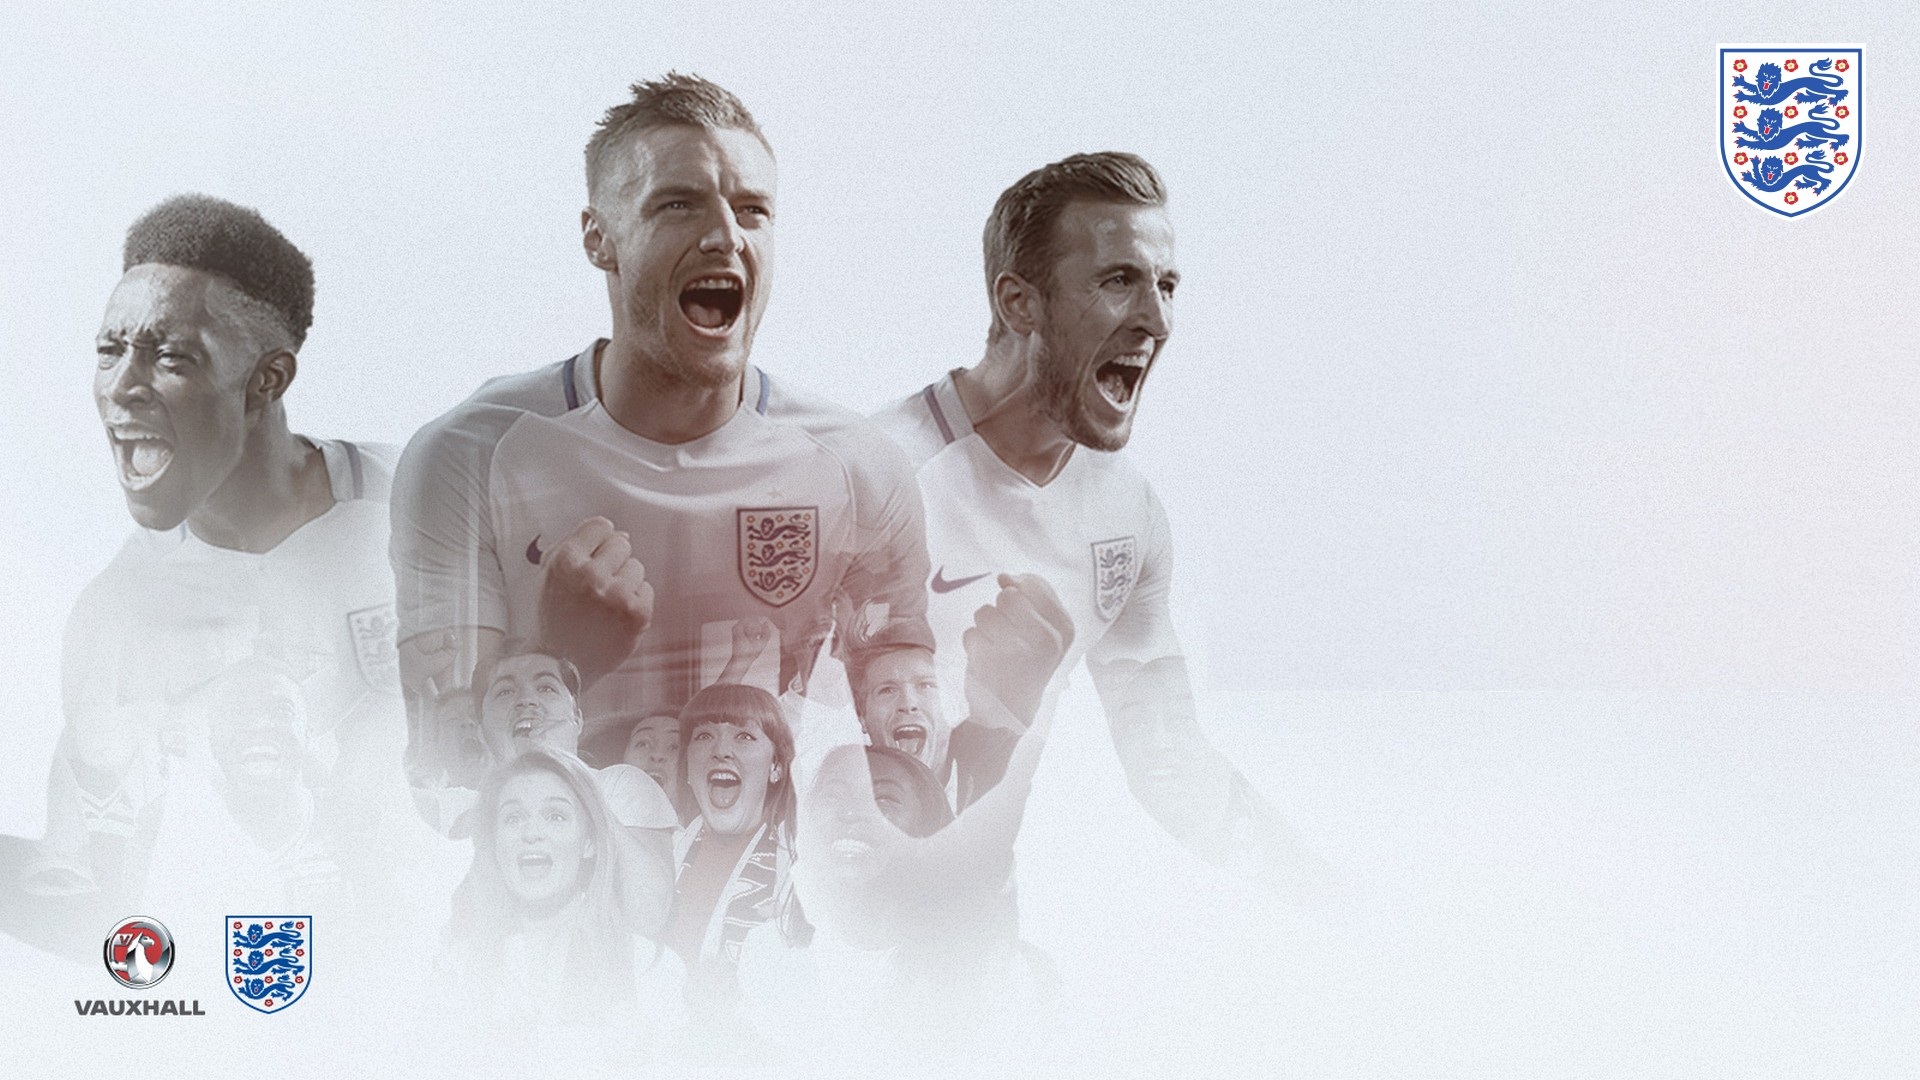 England World Cup Squad Wallpaper HD With Resolution 1920X1080 pixel. You can make this wallpaper for your Mac or Windows Desktop Background, iPhone, Android or Tablet and another Smartphone device for free